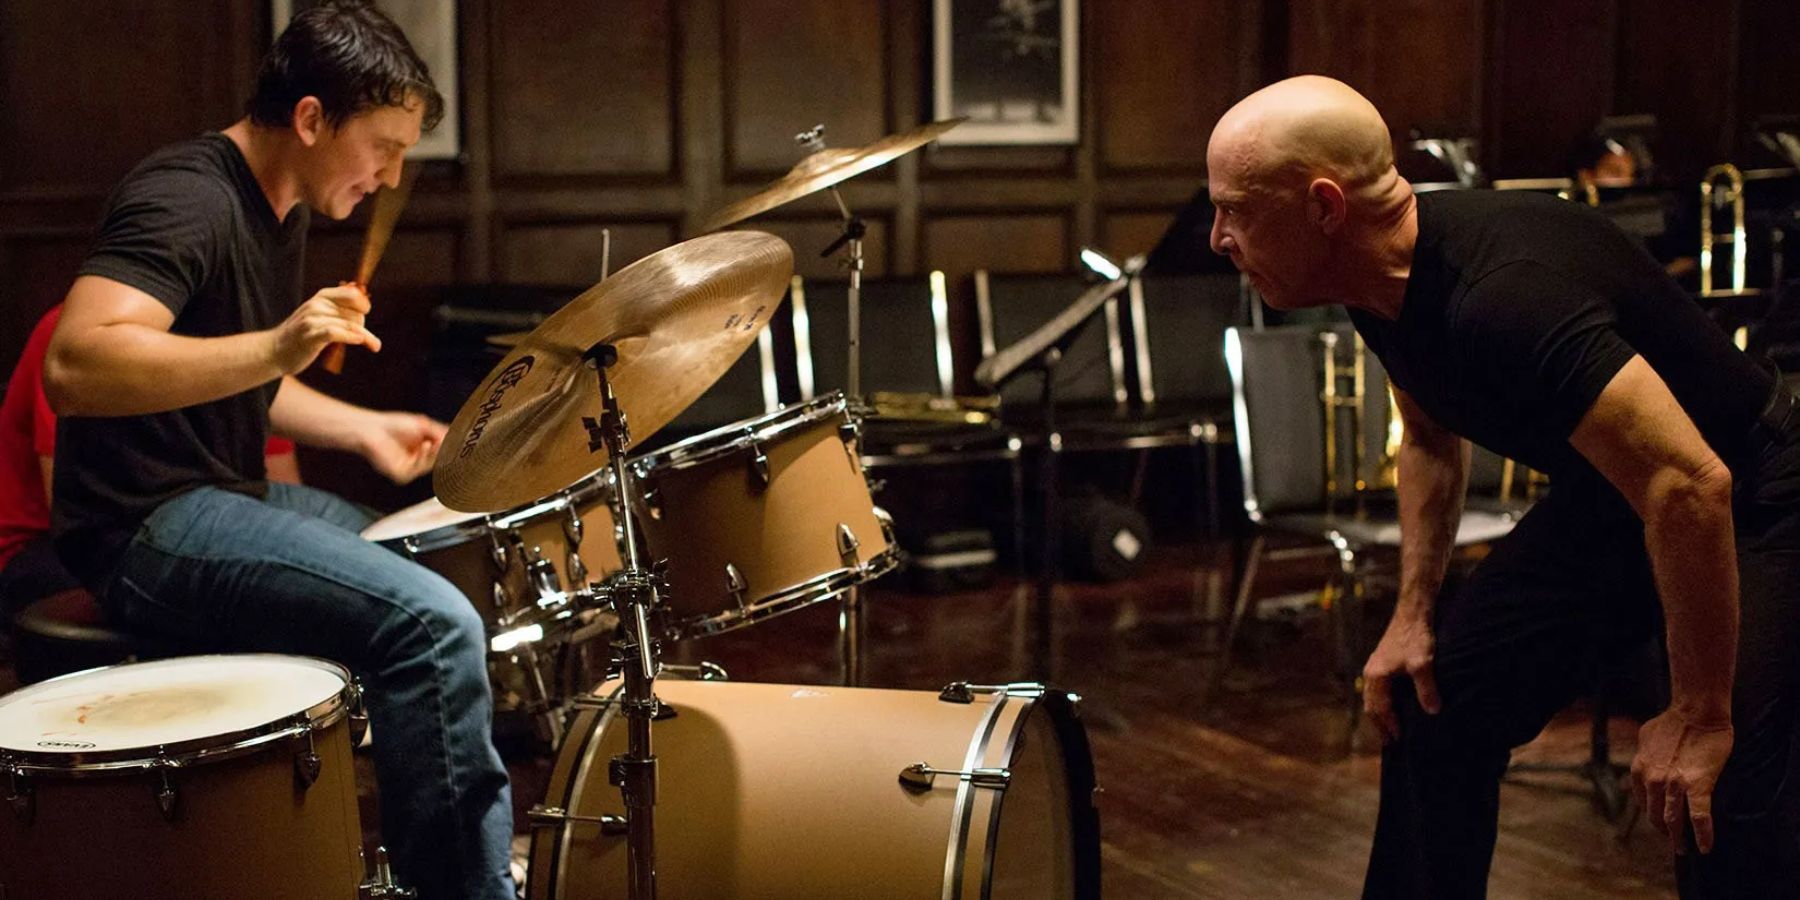 Andrew (Miles Teller) plays drums with Fletcher (JK Simmons) screaming at Whiplash